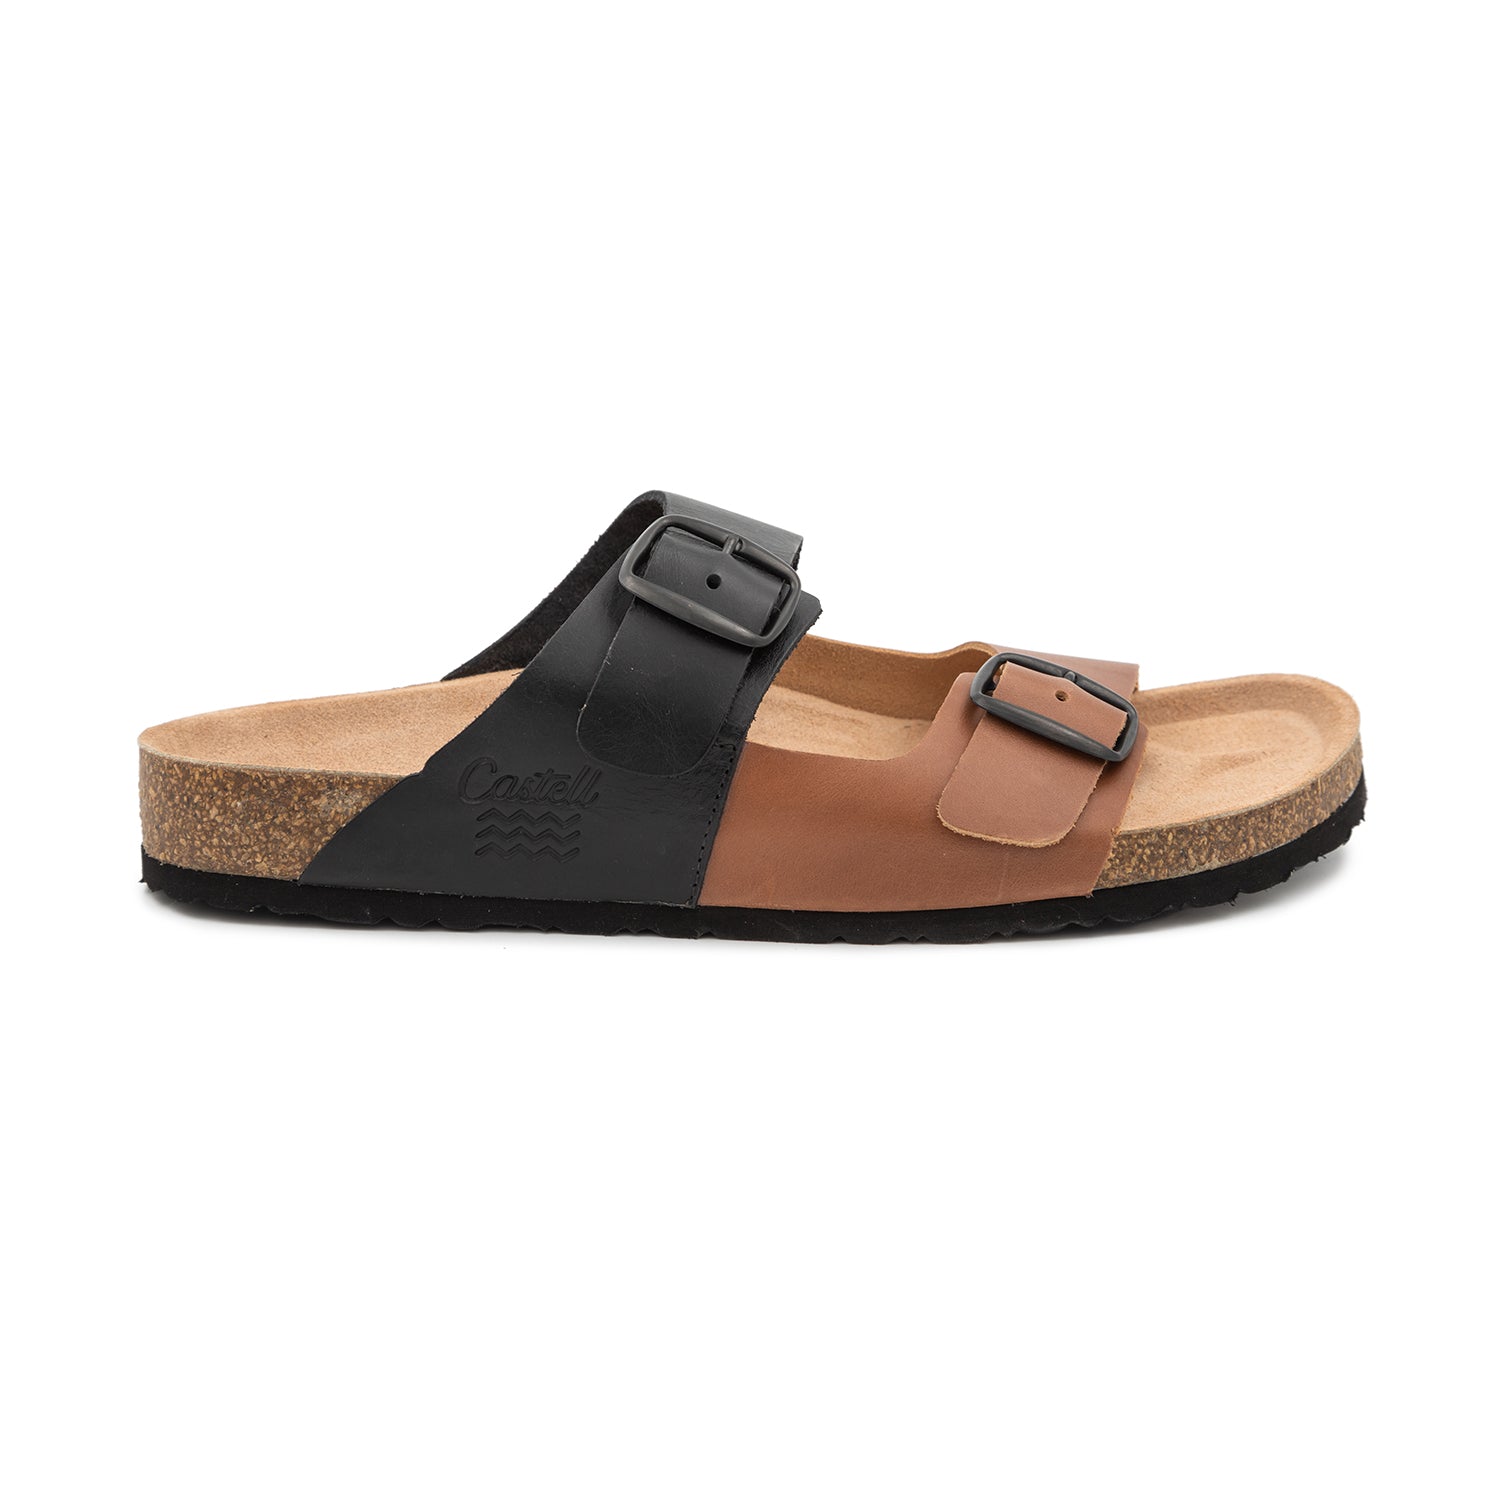 Leather Sandal With Open Toe for Men - 1727 Greco Picaso